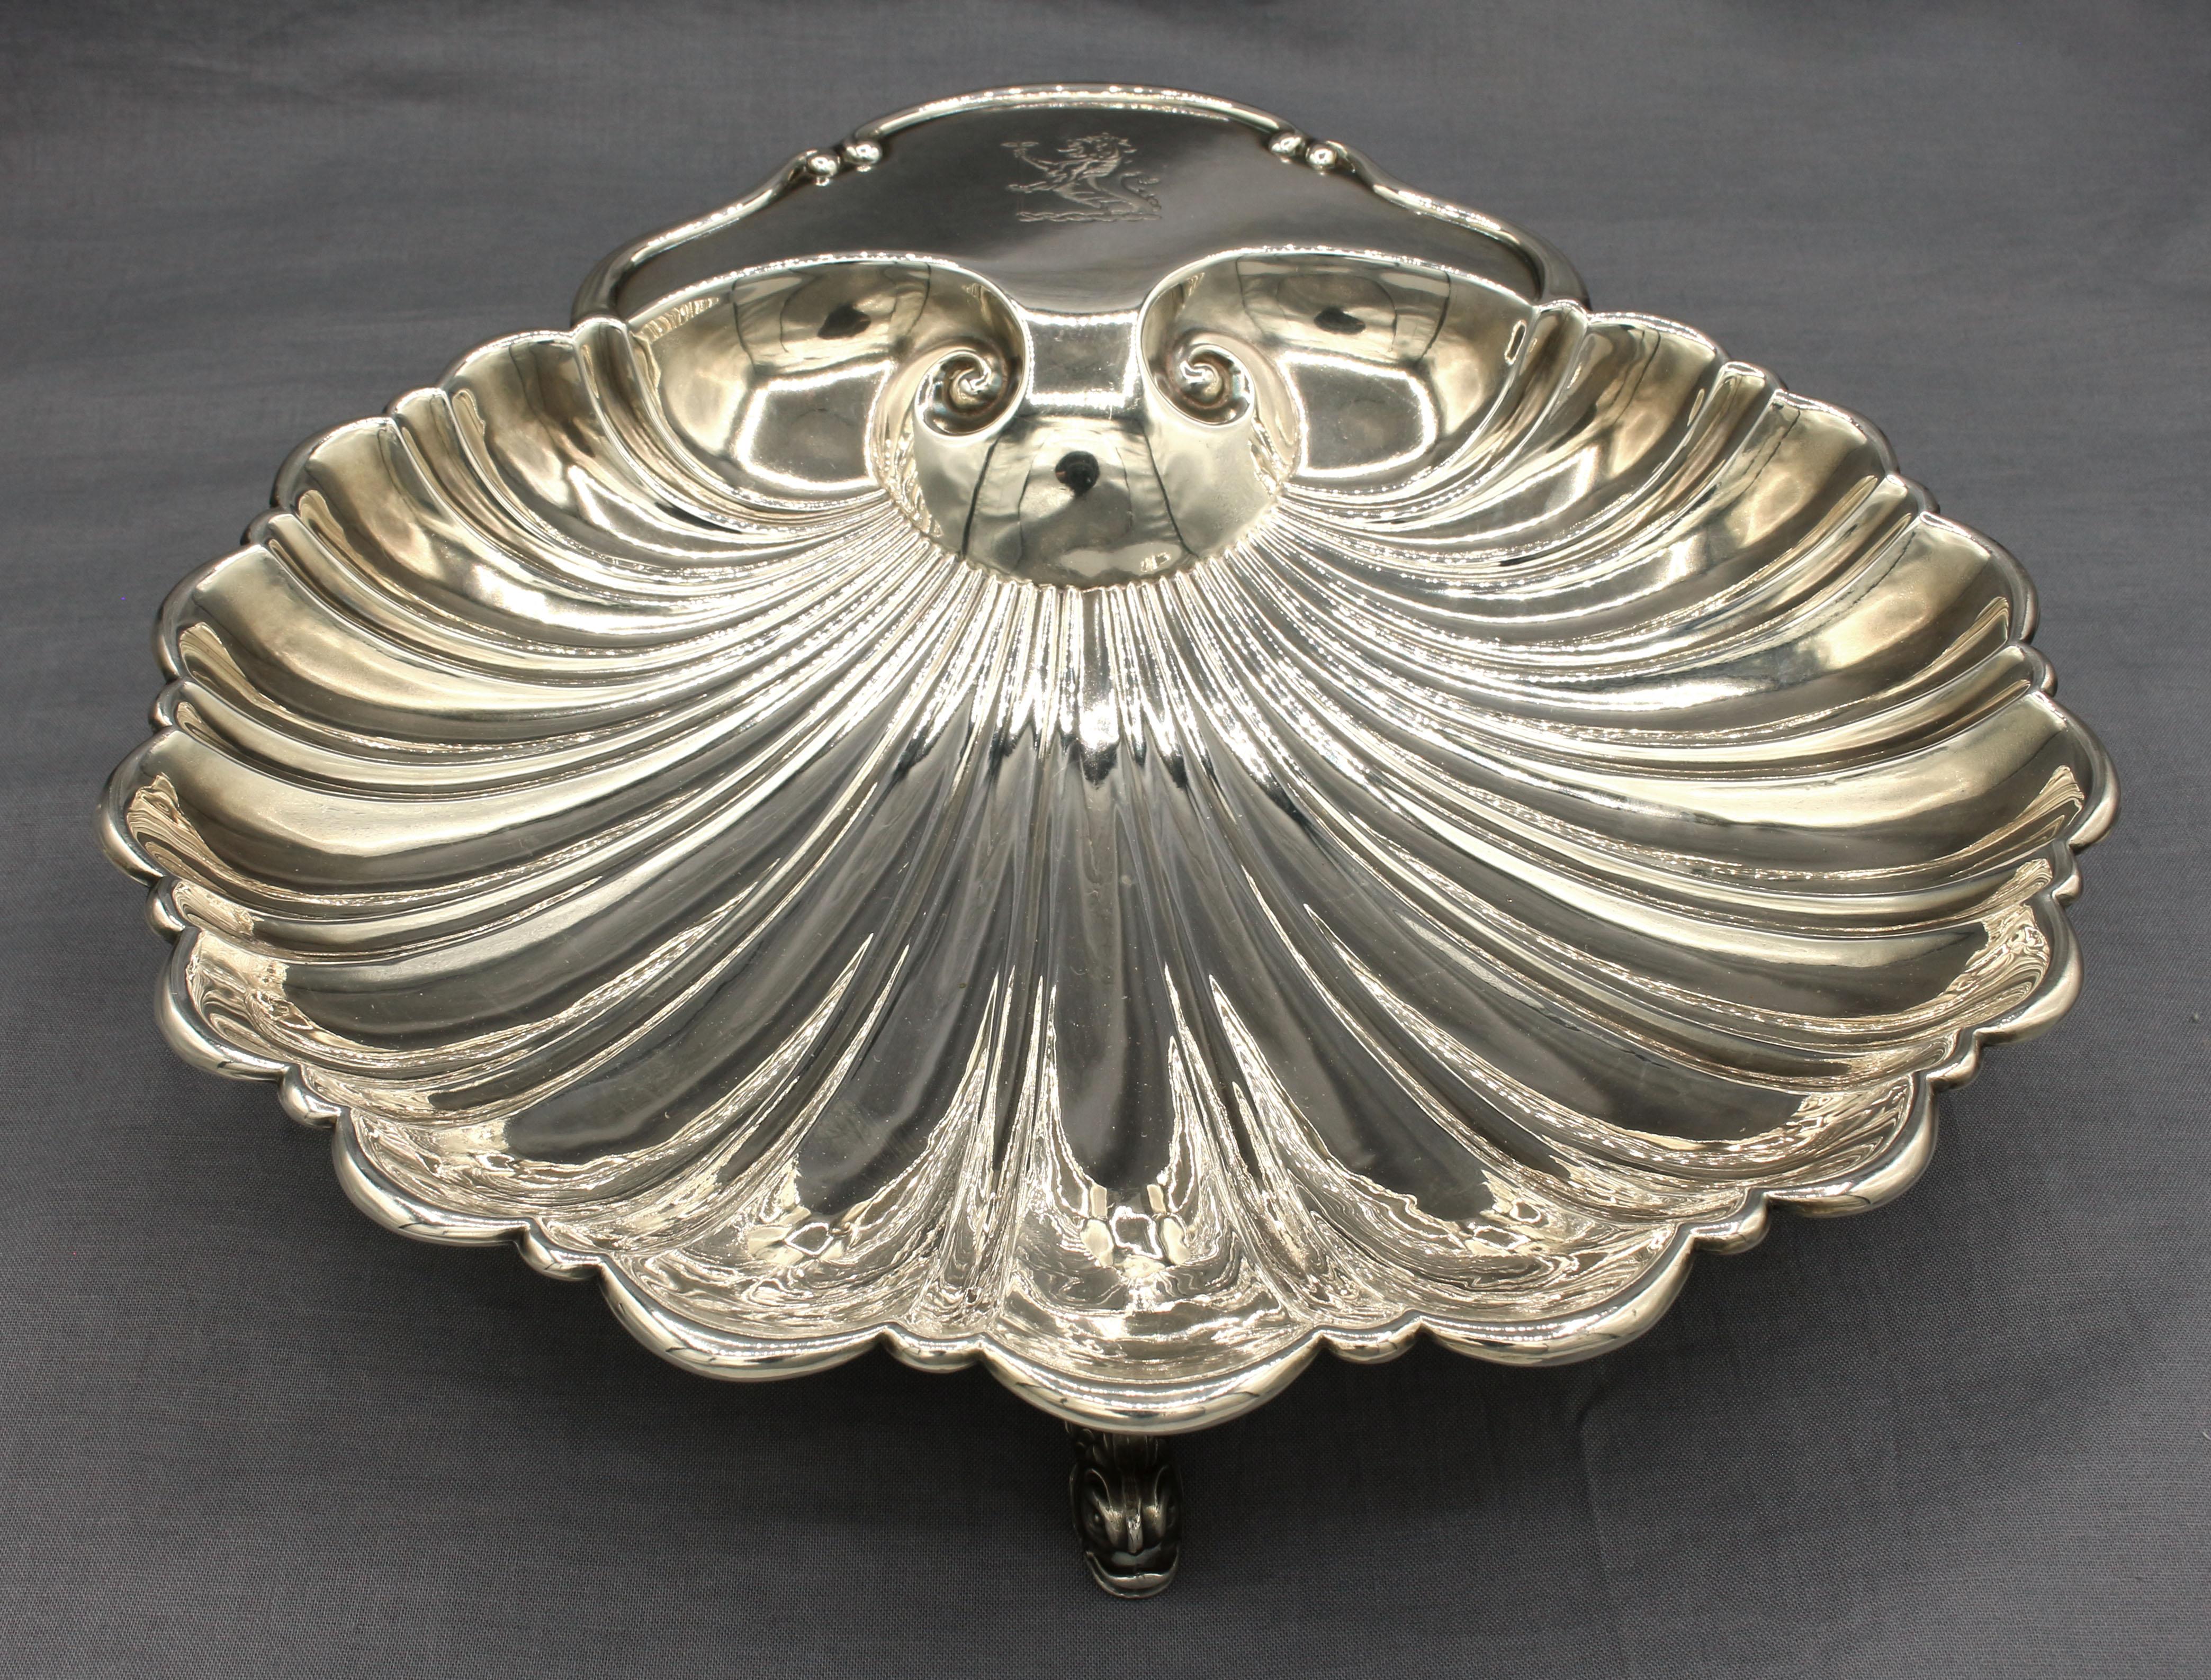 Scallop shaped serving bowl, silver plate, circa 1950s. Elegant dolphin feet, pseudo English crest decoration. Crescent silverware (now part of Kirk). Measures 10 1/8